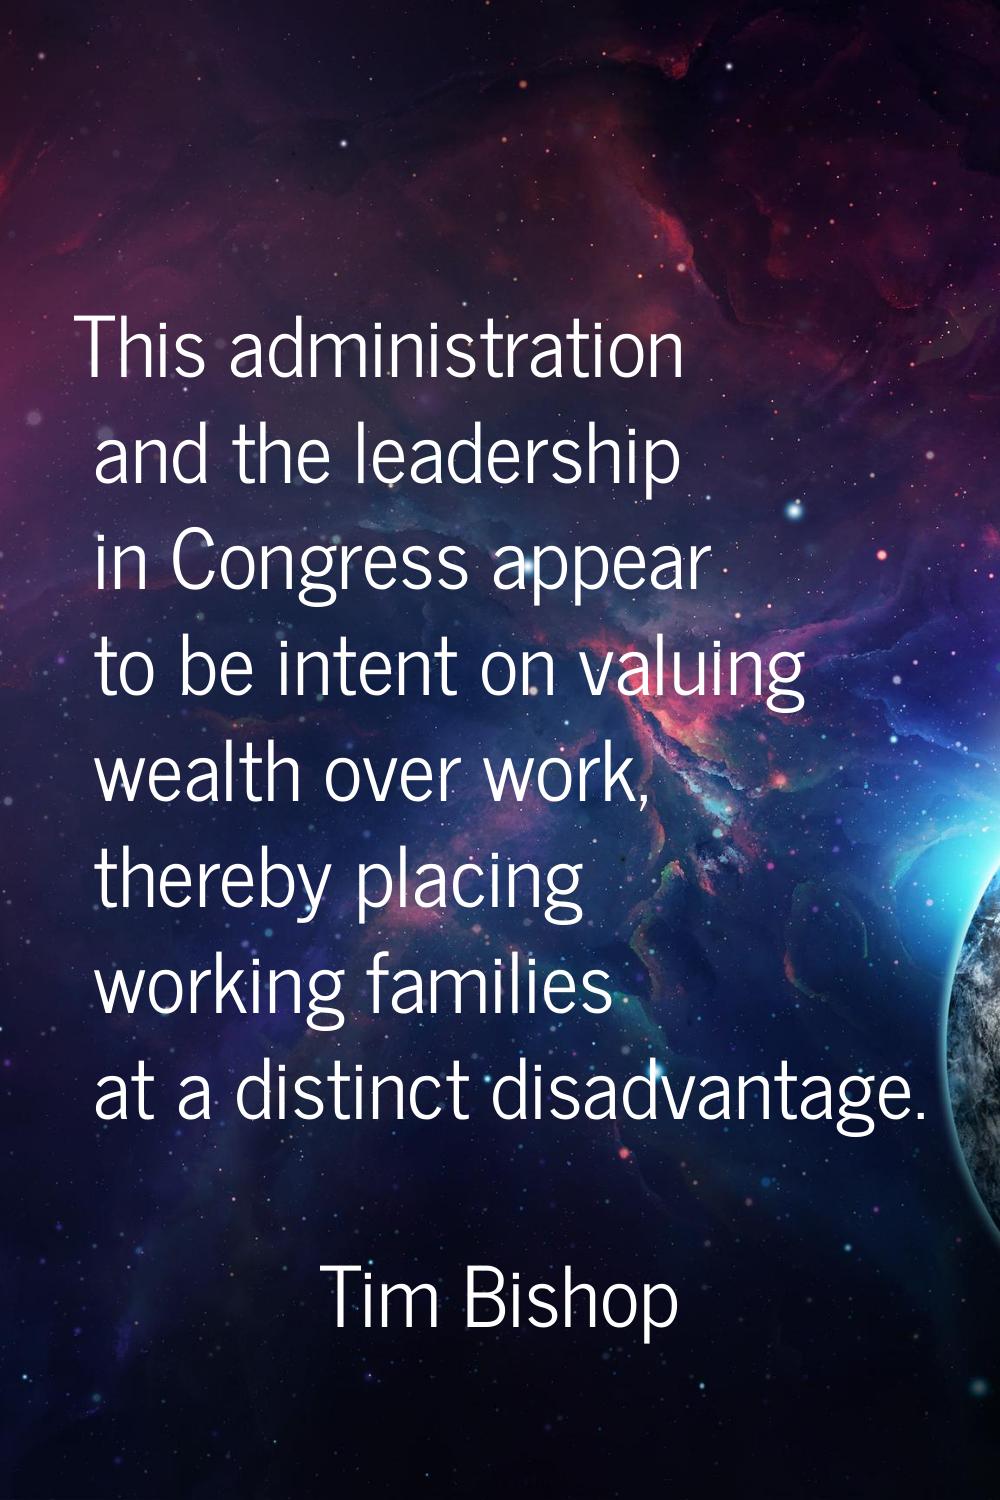 This administration and the leadership in Congress appear to be intent on valuing wealth over work,